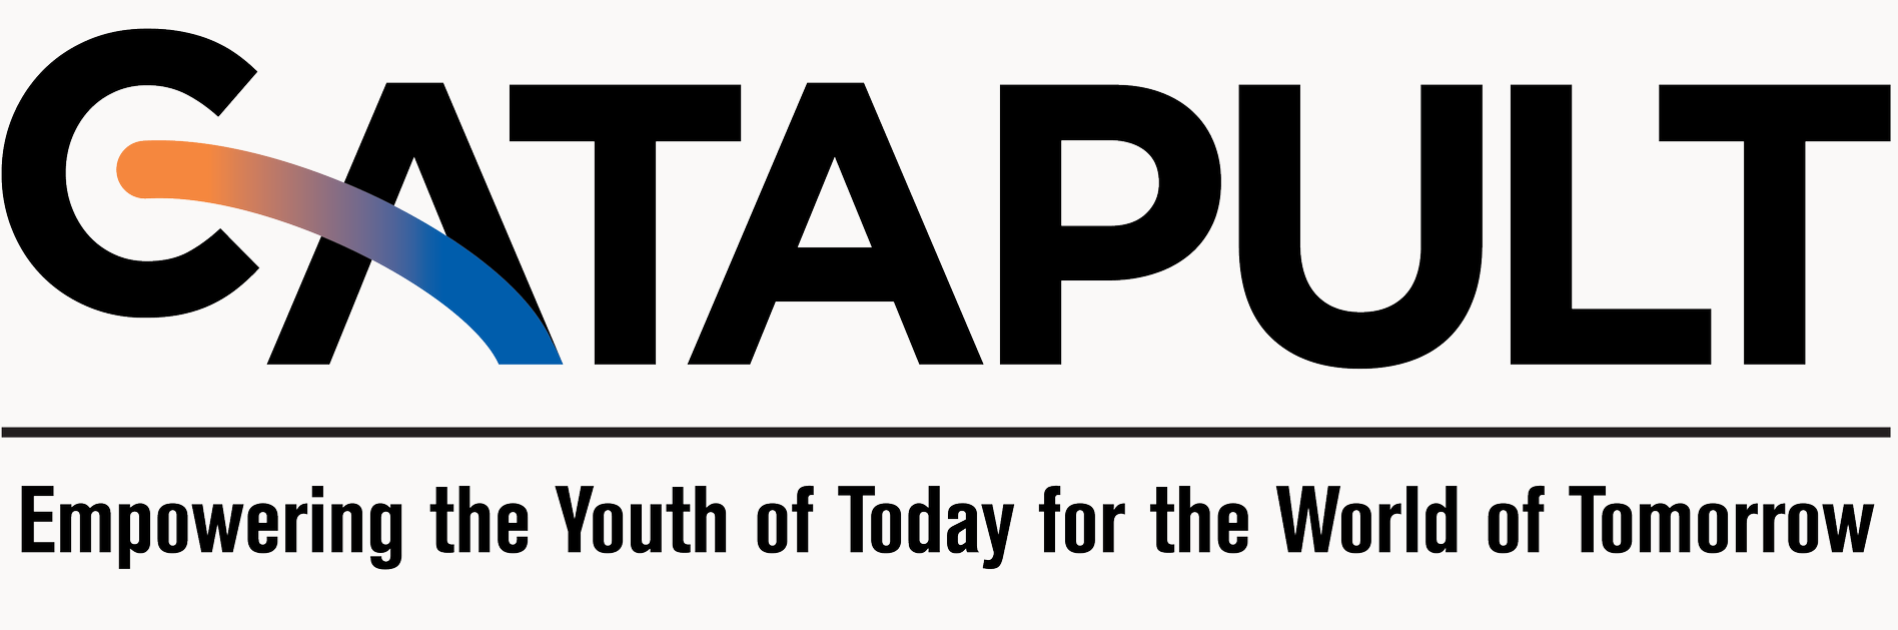 Catapult logo - empowering the youth of today for the world of tomorrow